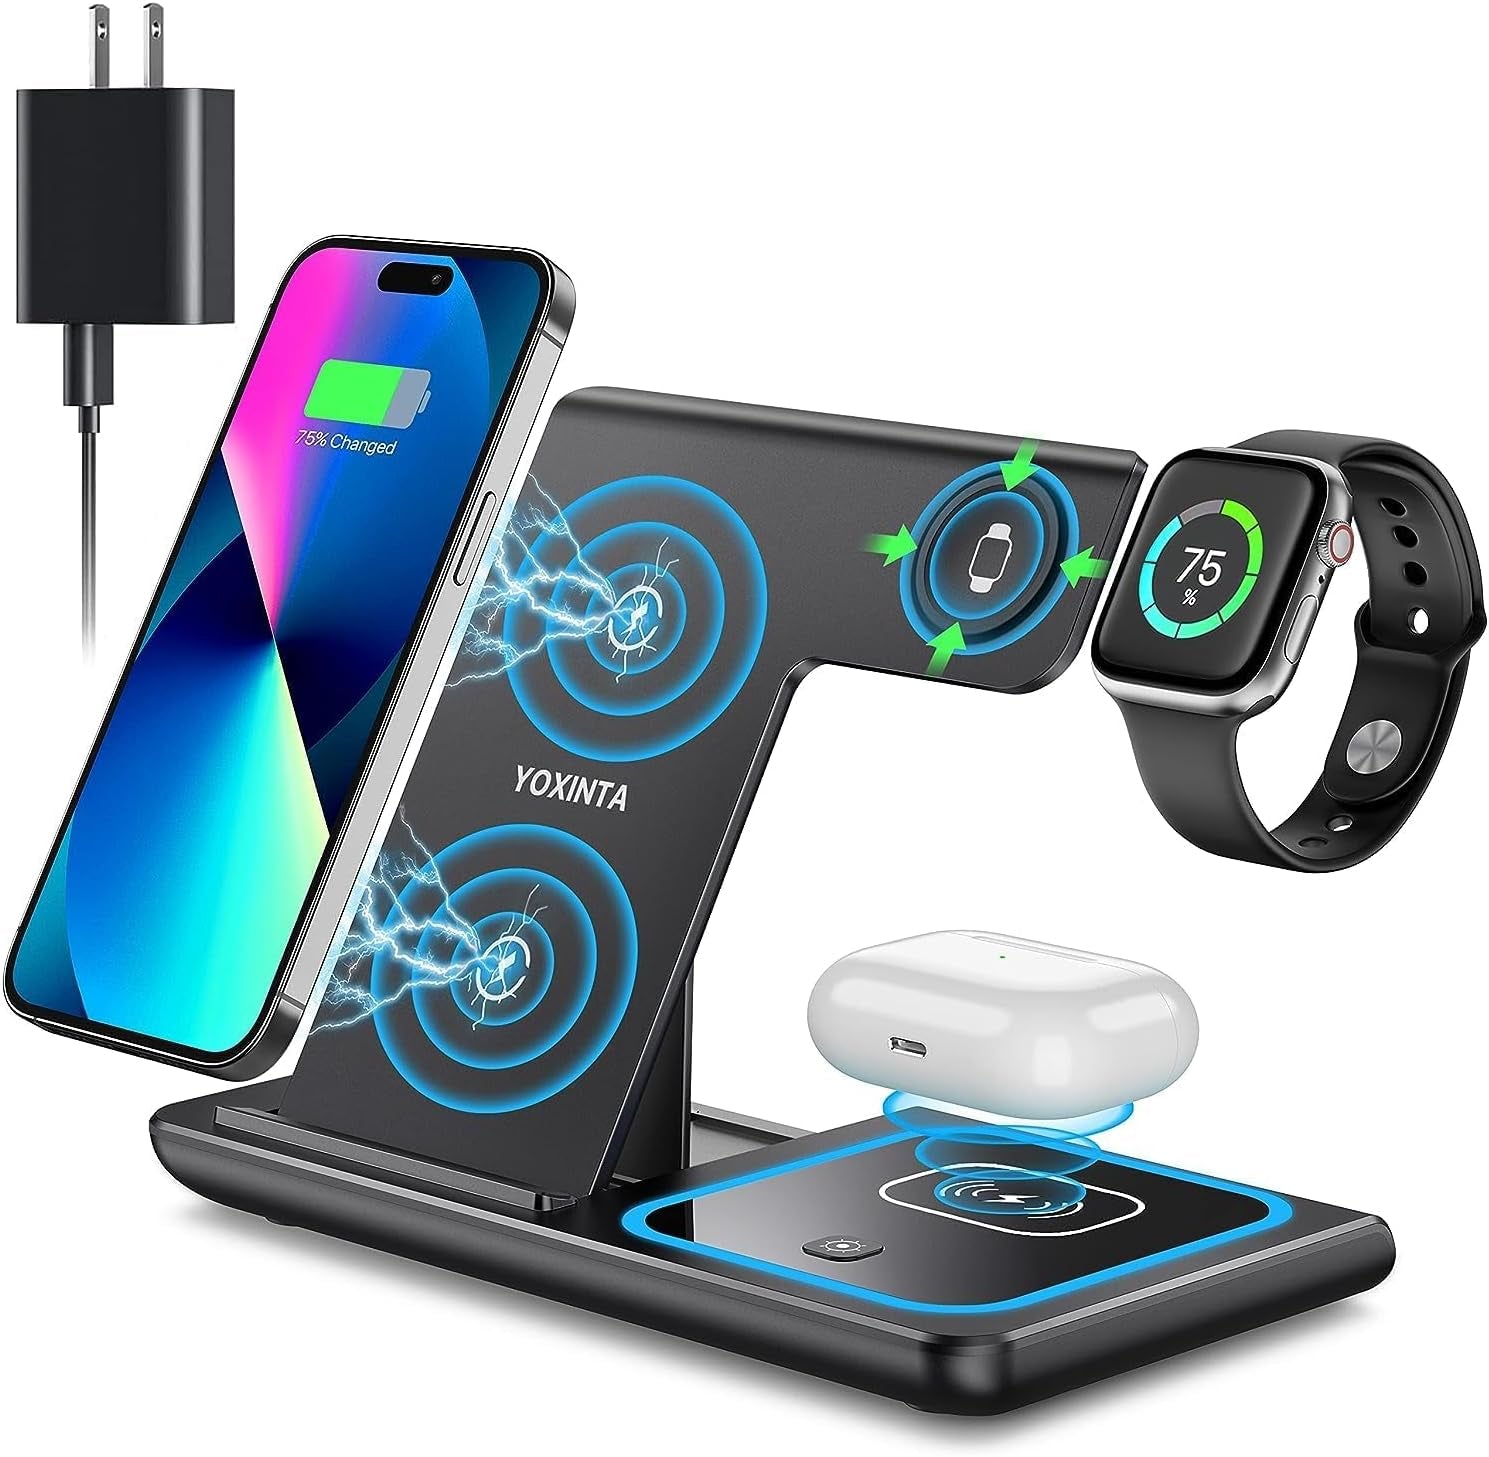 Spring Wireless Charger, 3 in 1 Wireless Charging Station, Fast Wireless Charger Stand for Iphone 